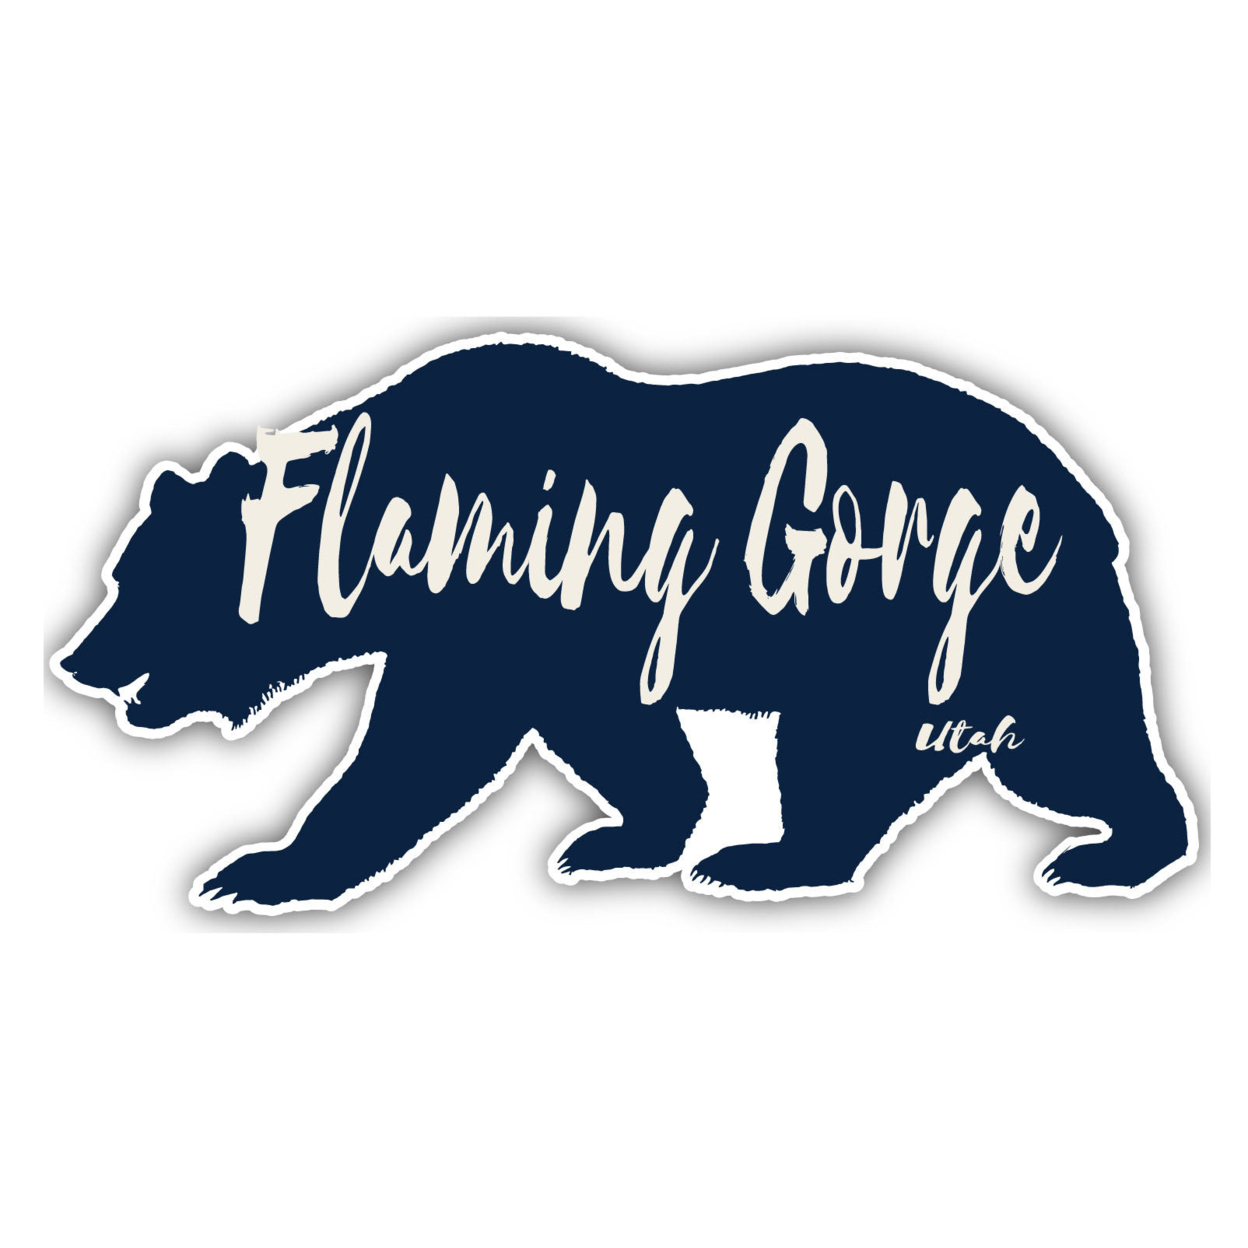 Flaming Gorge Utah Souvenir Decorative Stickers (Choose Theme And Size) - 4-Pack, 8-Inch, Bear